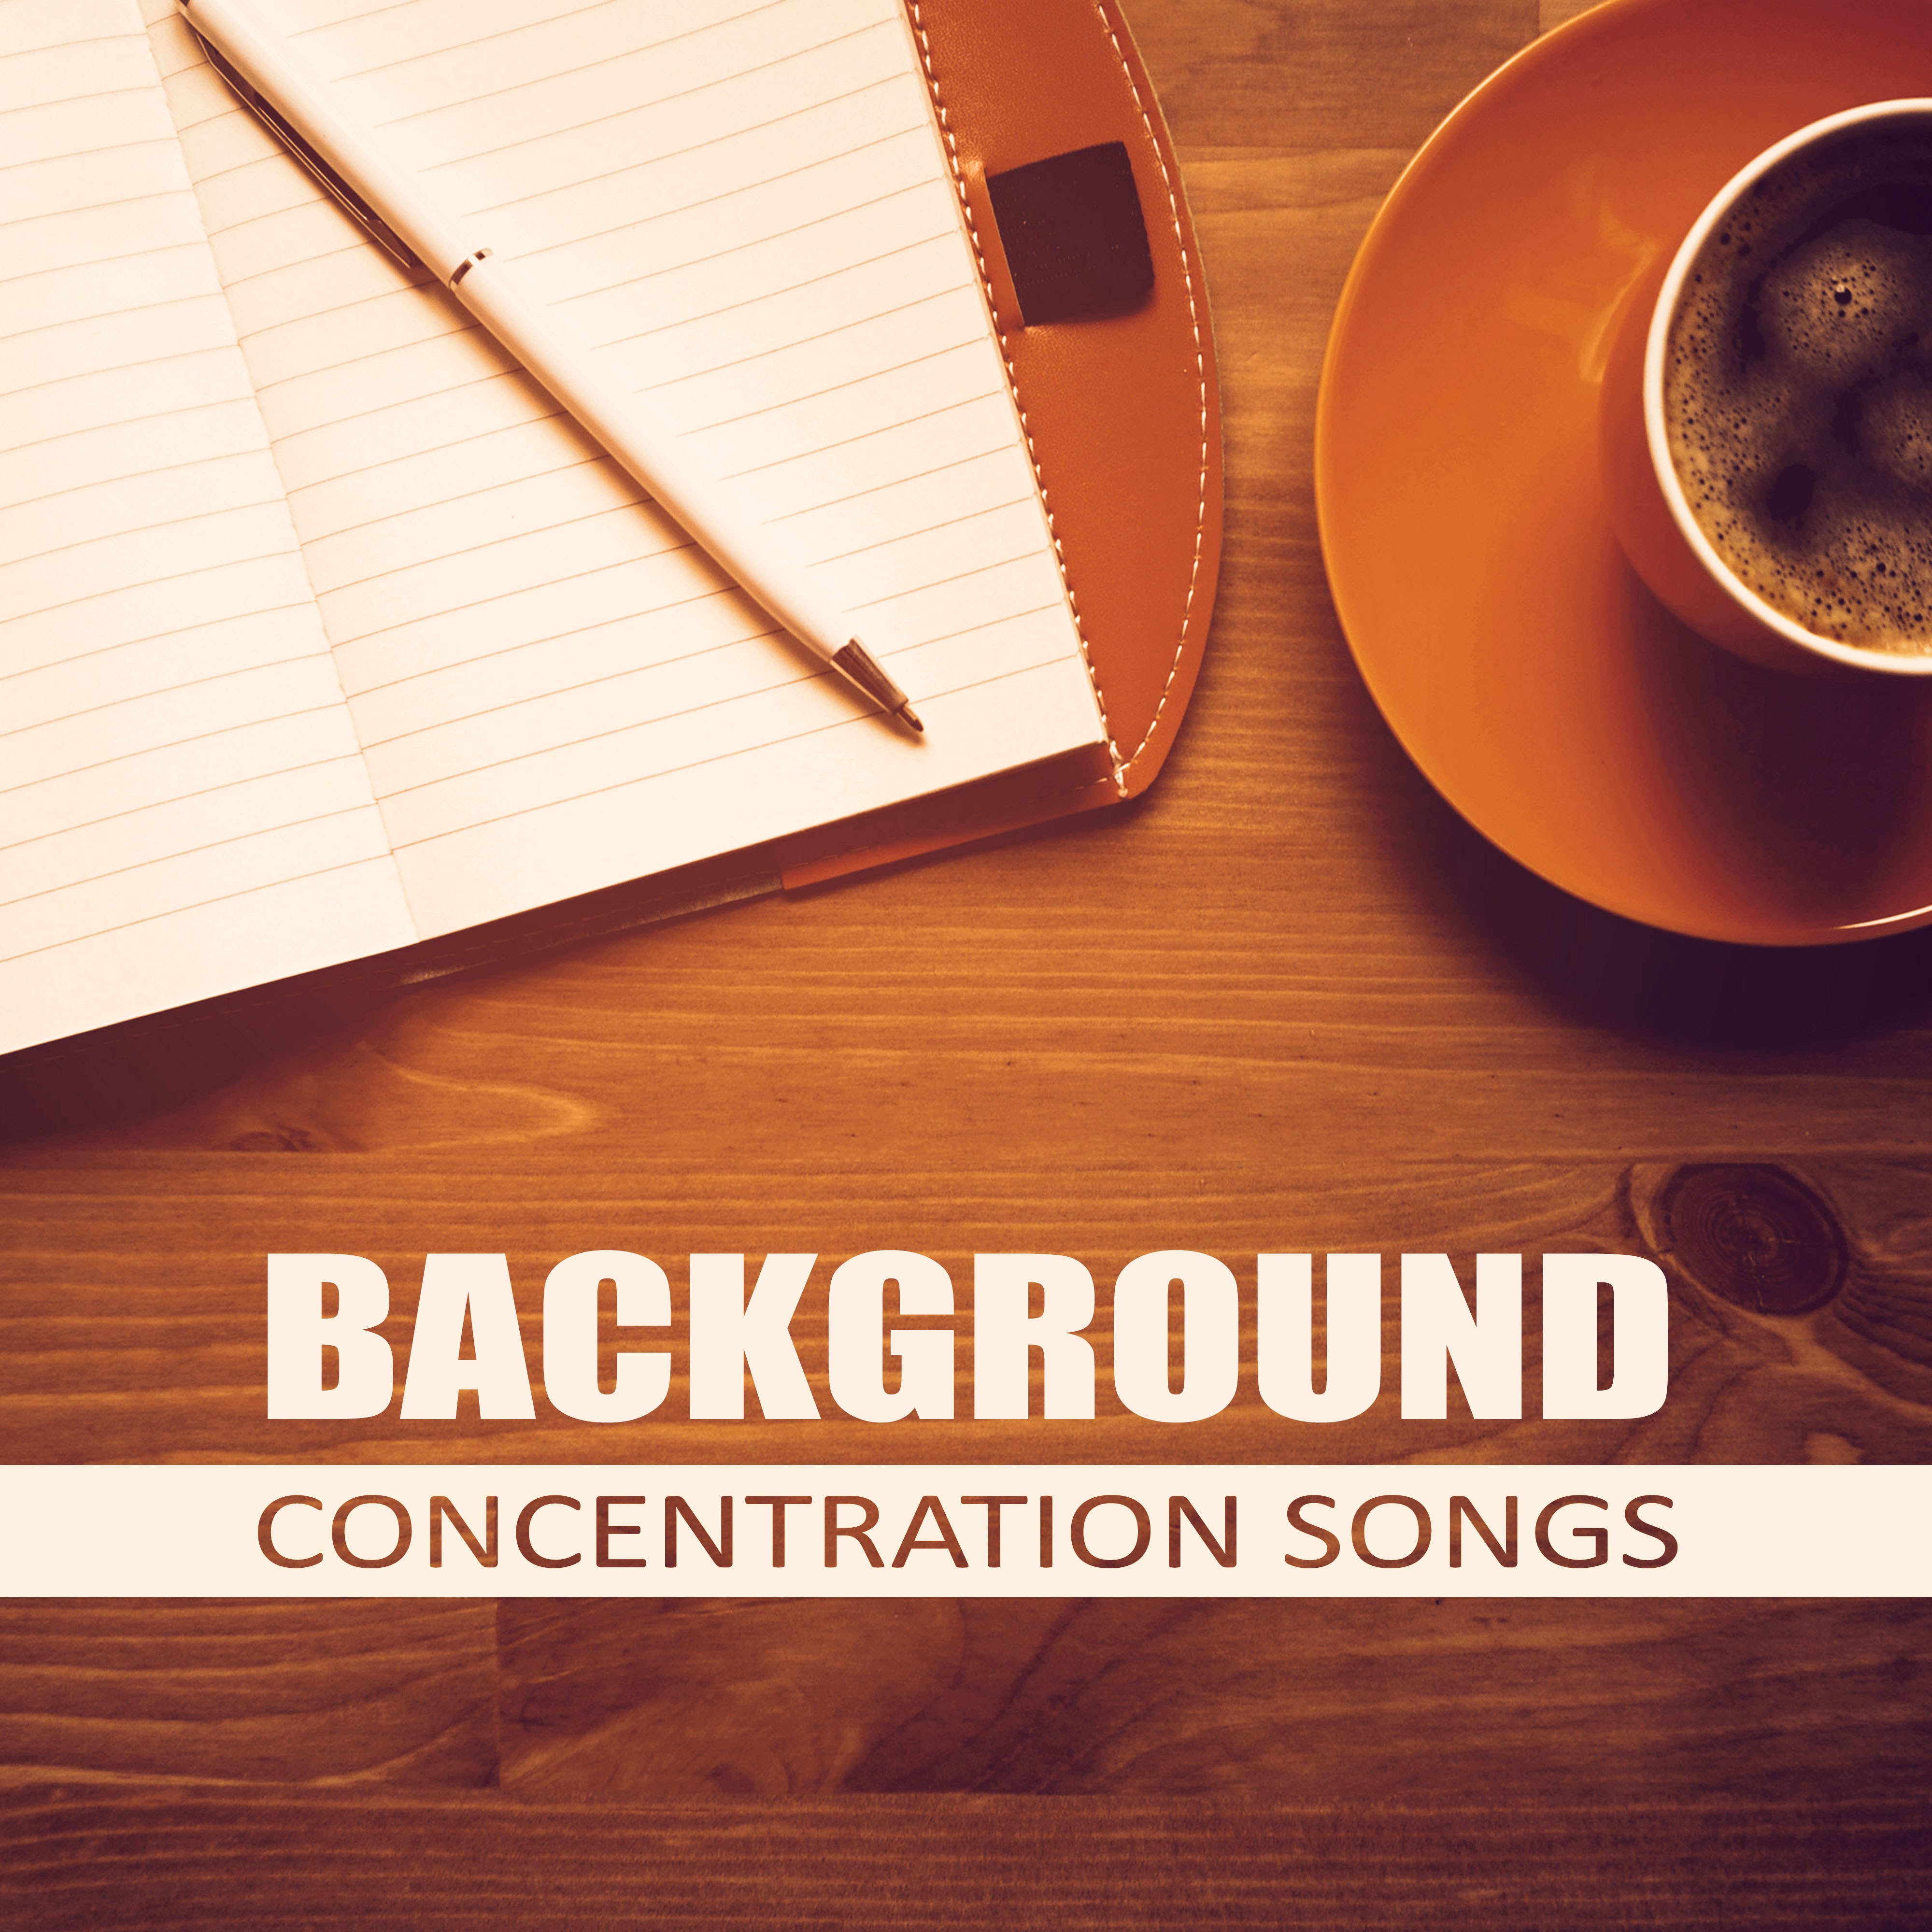 Background Concentration Songs  Learning Sounds to Focus on Task, Concentration Music for Studying, Relaxing Piano Music for Reading